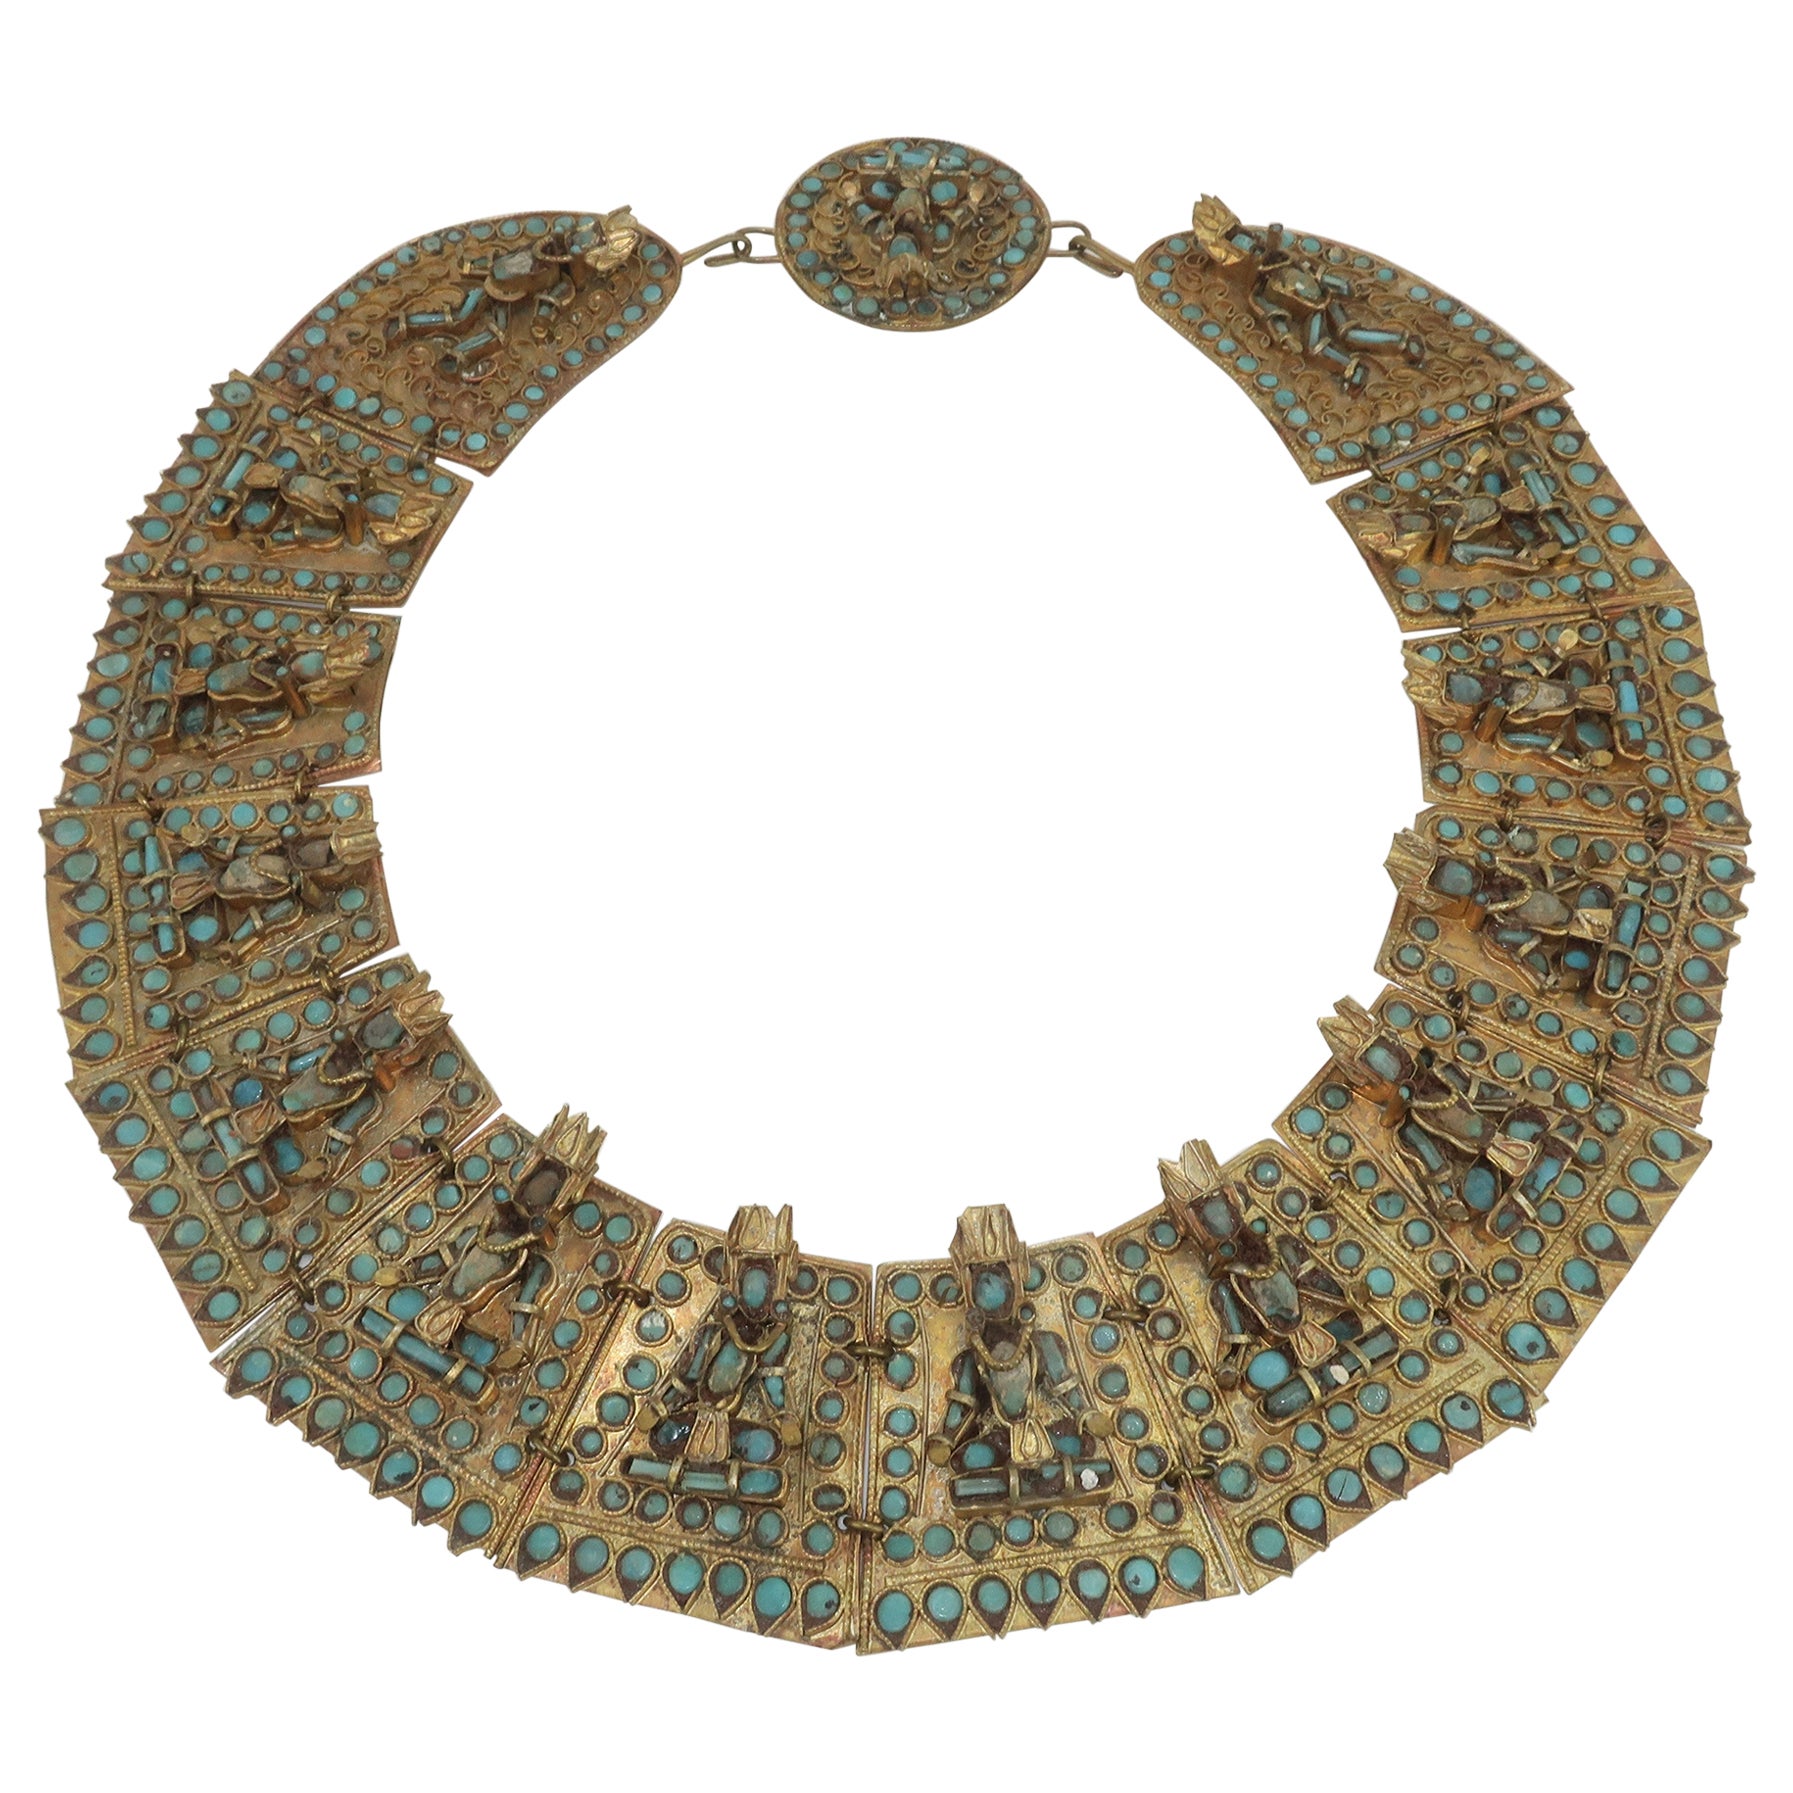 Vintage Thailand Collar Bib Necklace With Turquoise Glass Beads